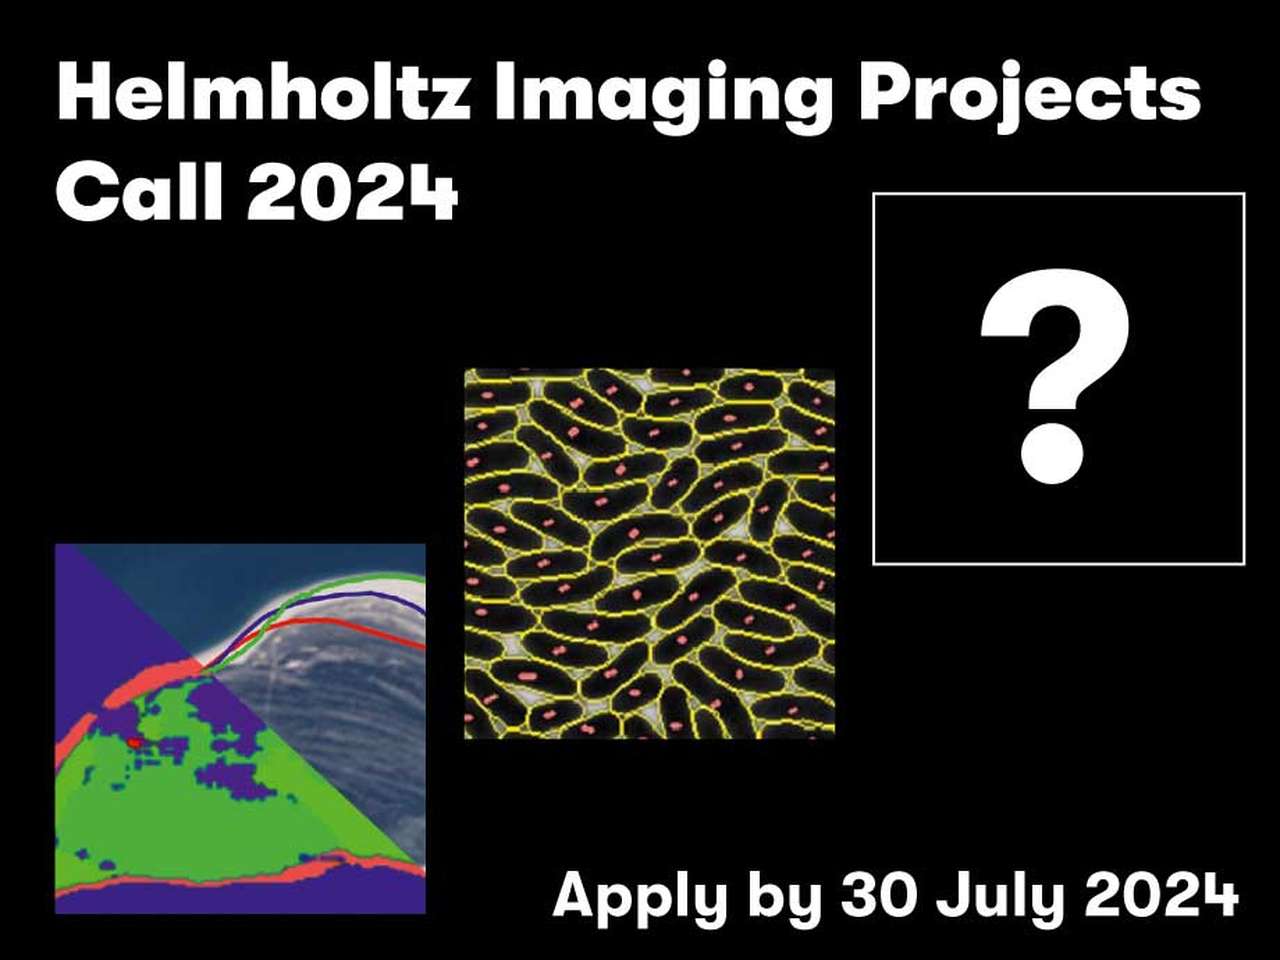 Helmholtz Imaging Projects Call 2024 is Open: Apply by July 30, 2024 Image